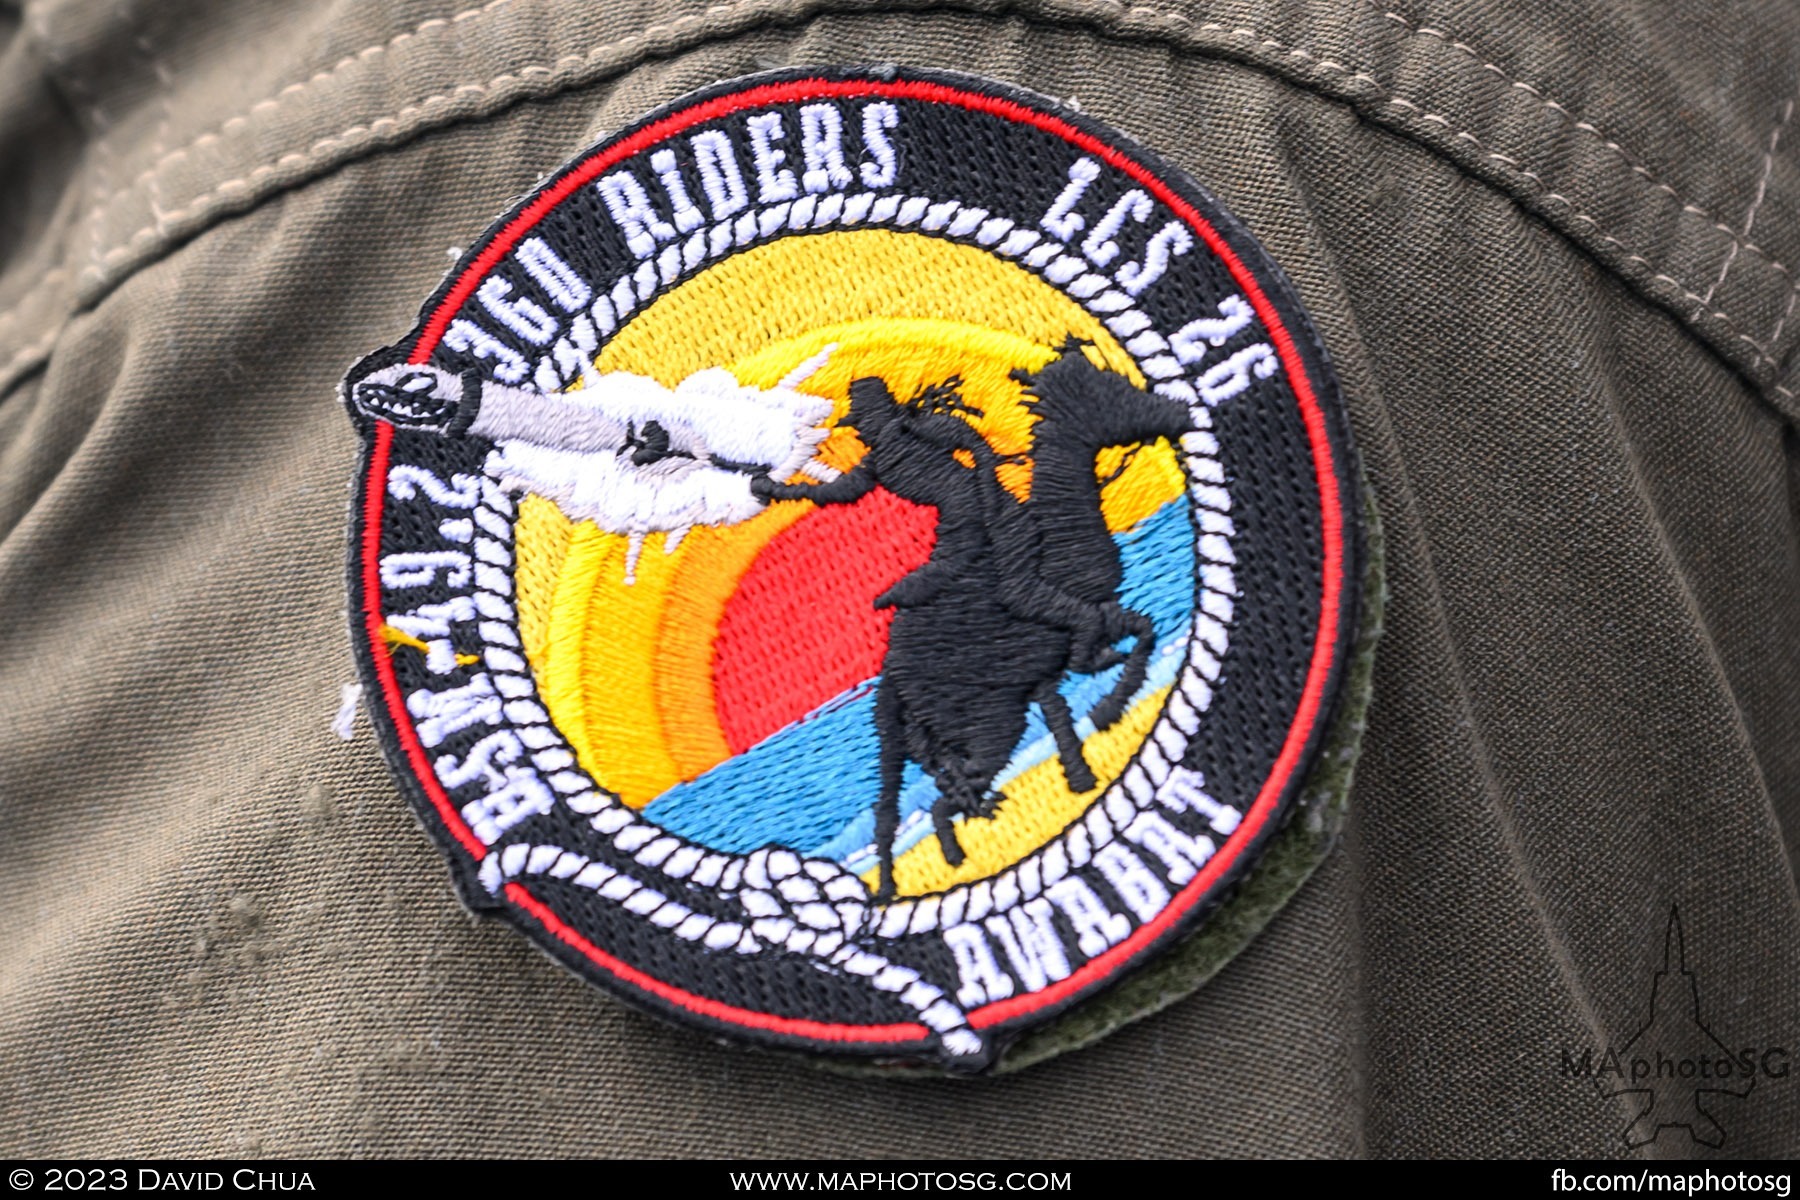 Patch on the pilot of the MH-60 helicopter